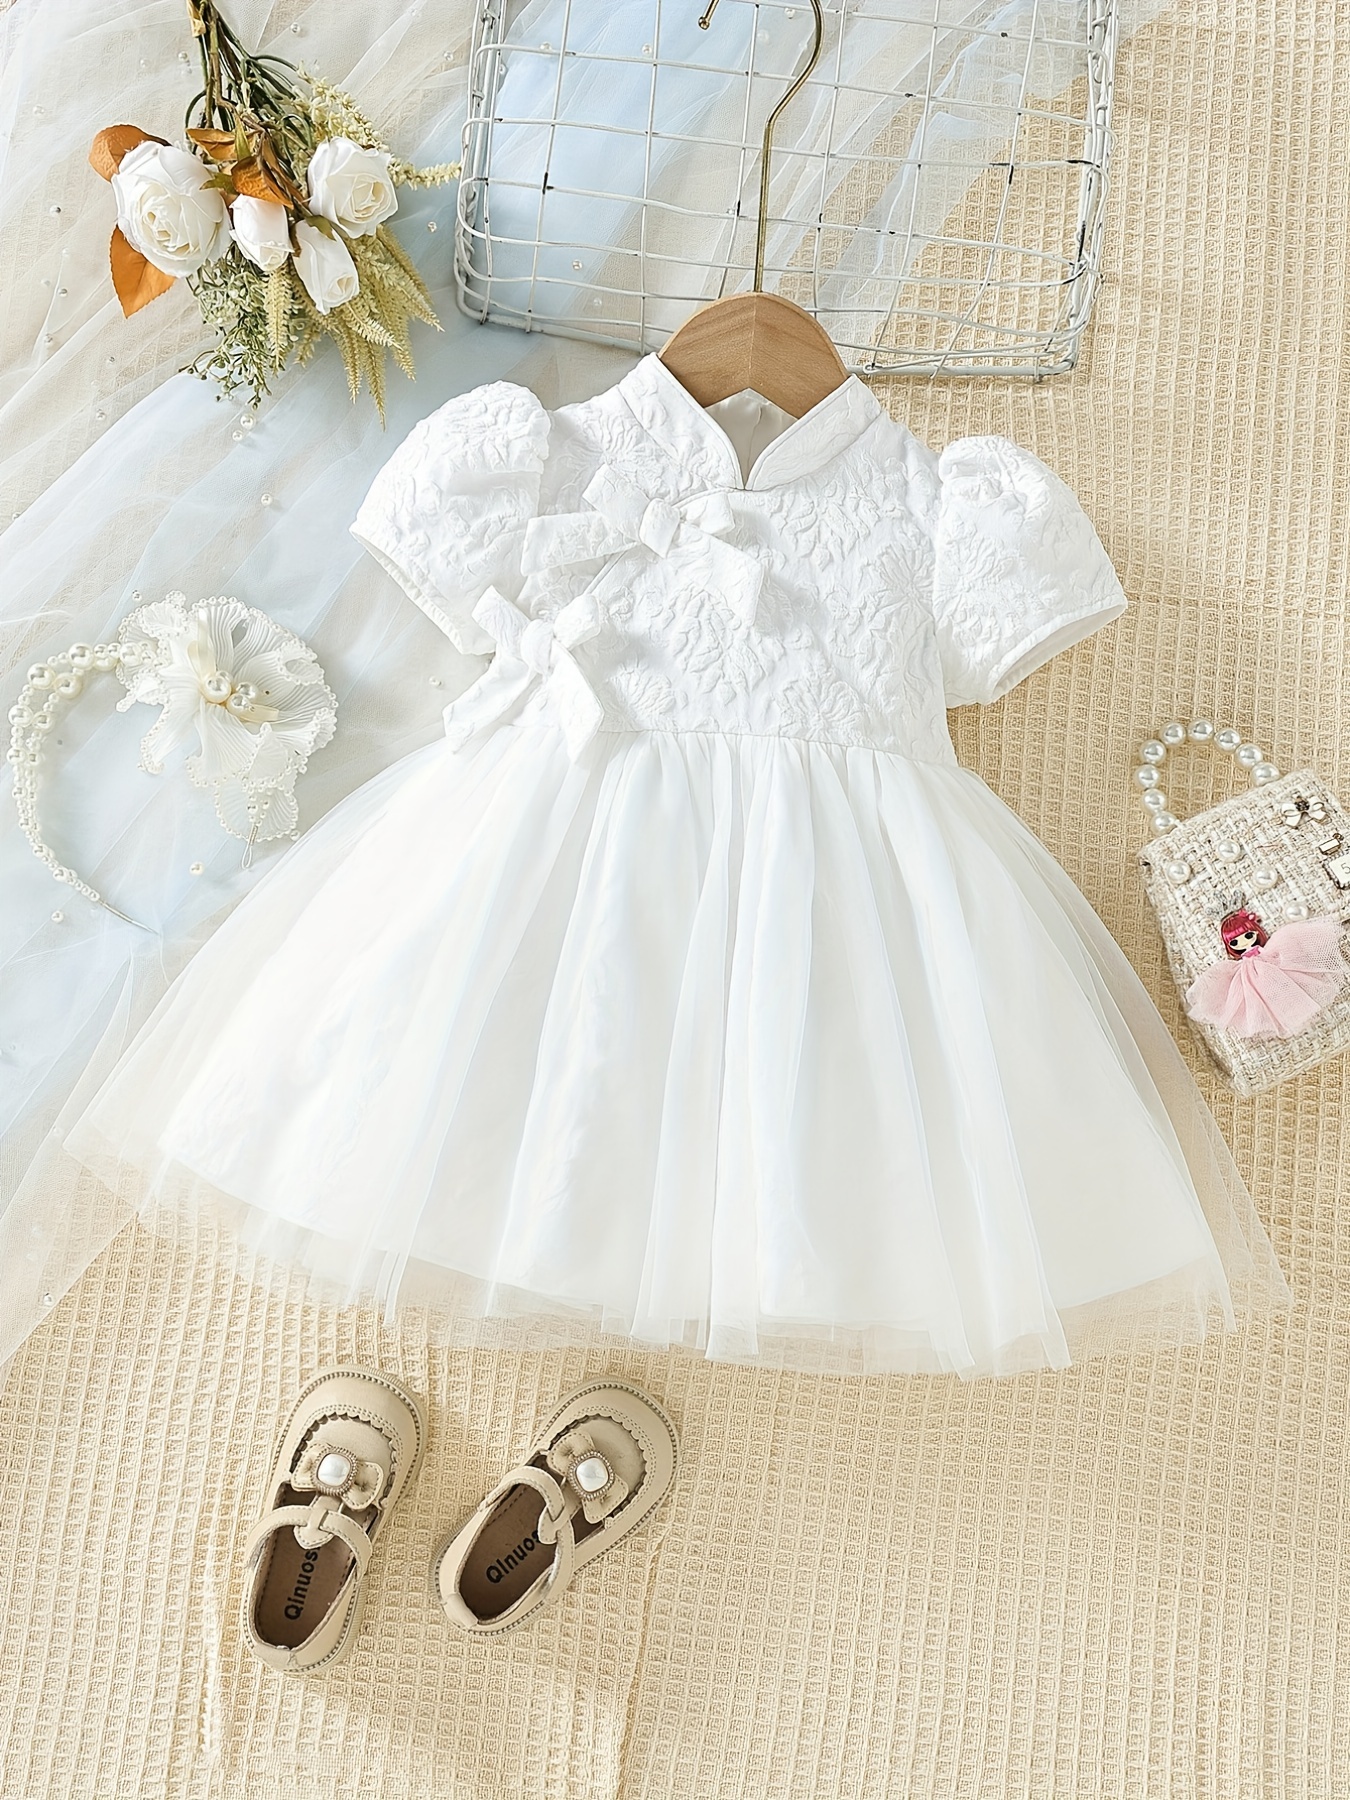 Stylish Baby Dresses with Free Shipping & Returns